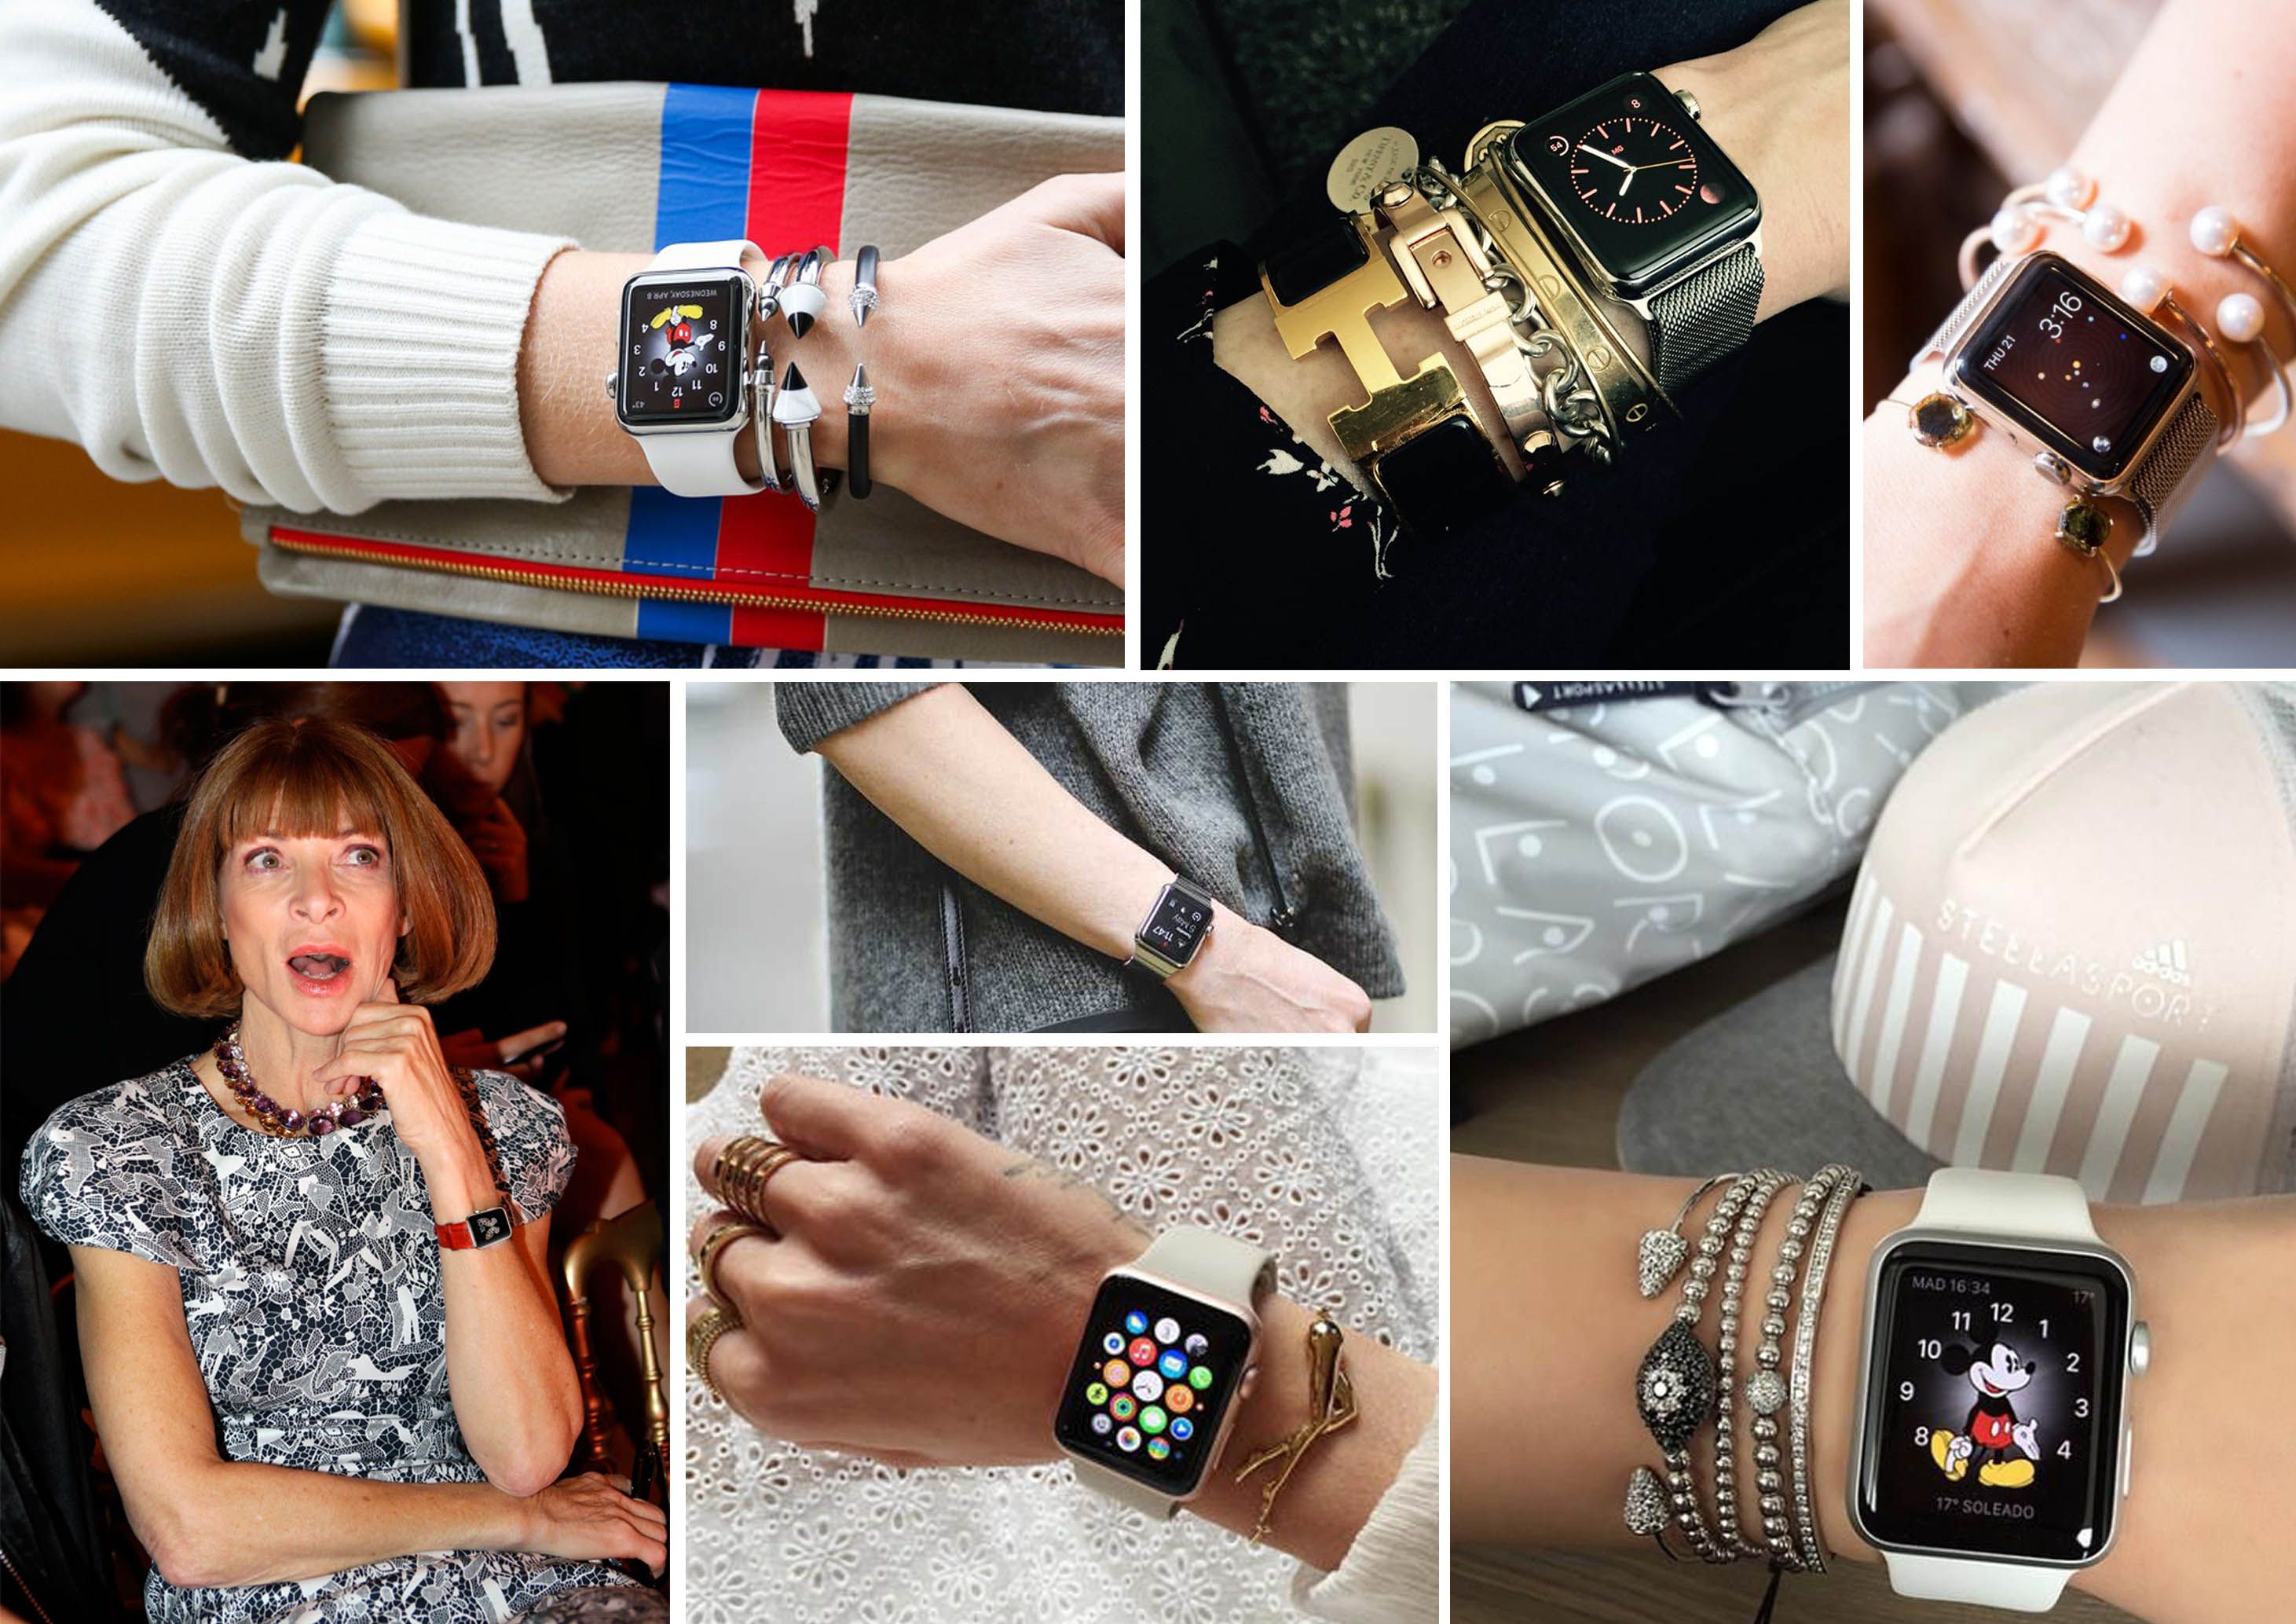 Apple Watch Steals The Spotlight Of The World's Fashion Industry 